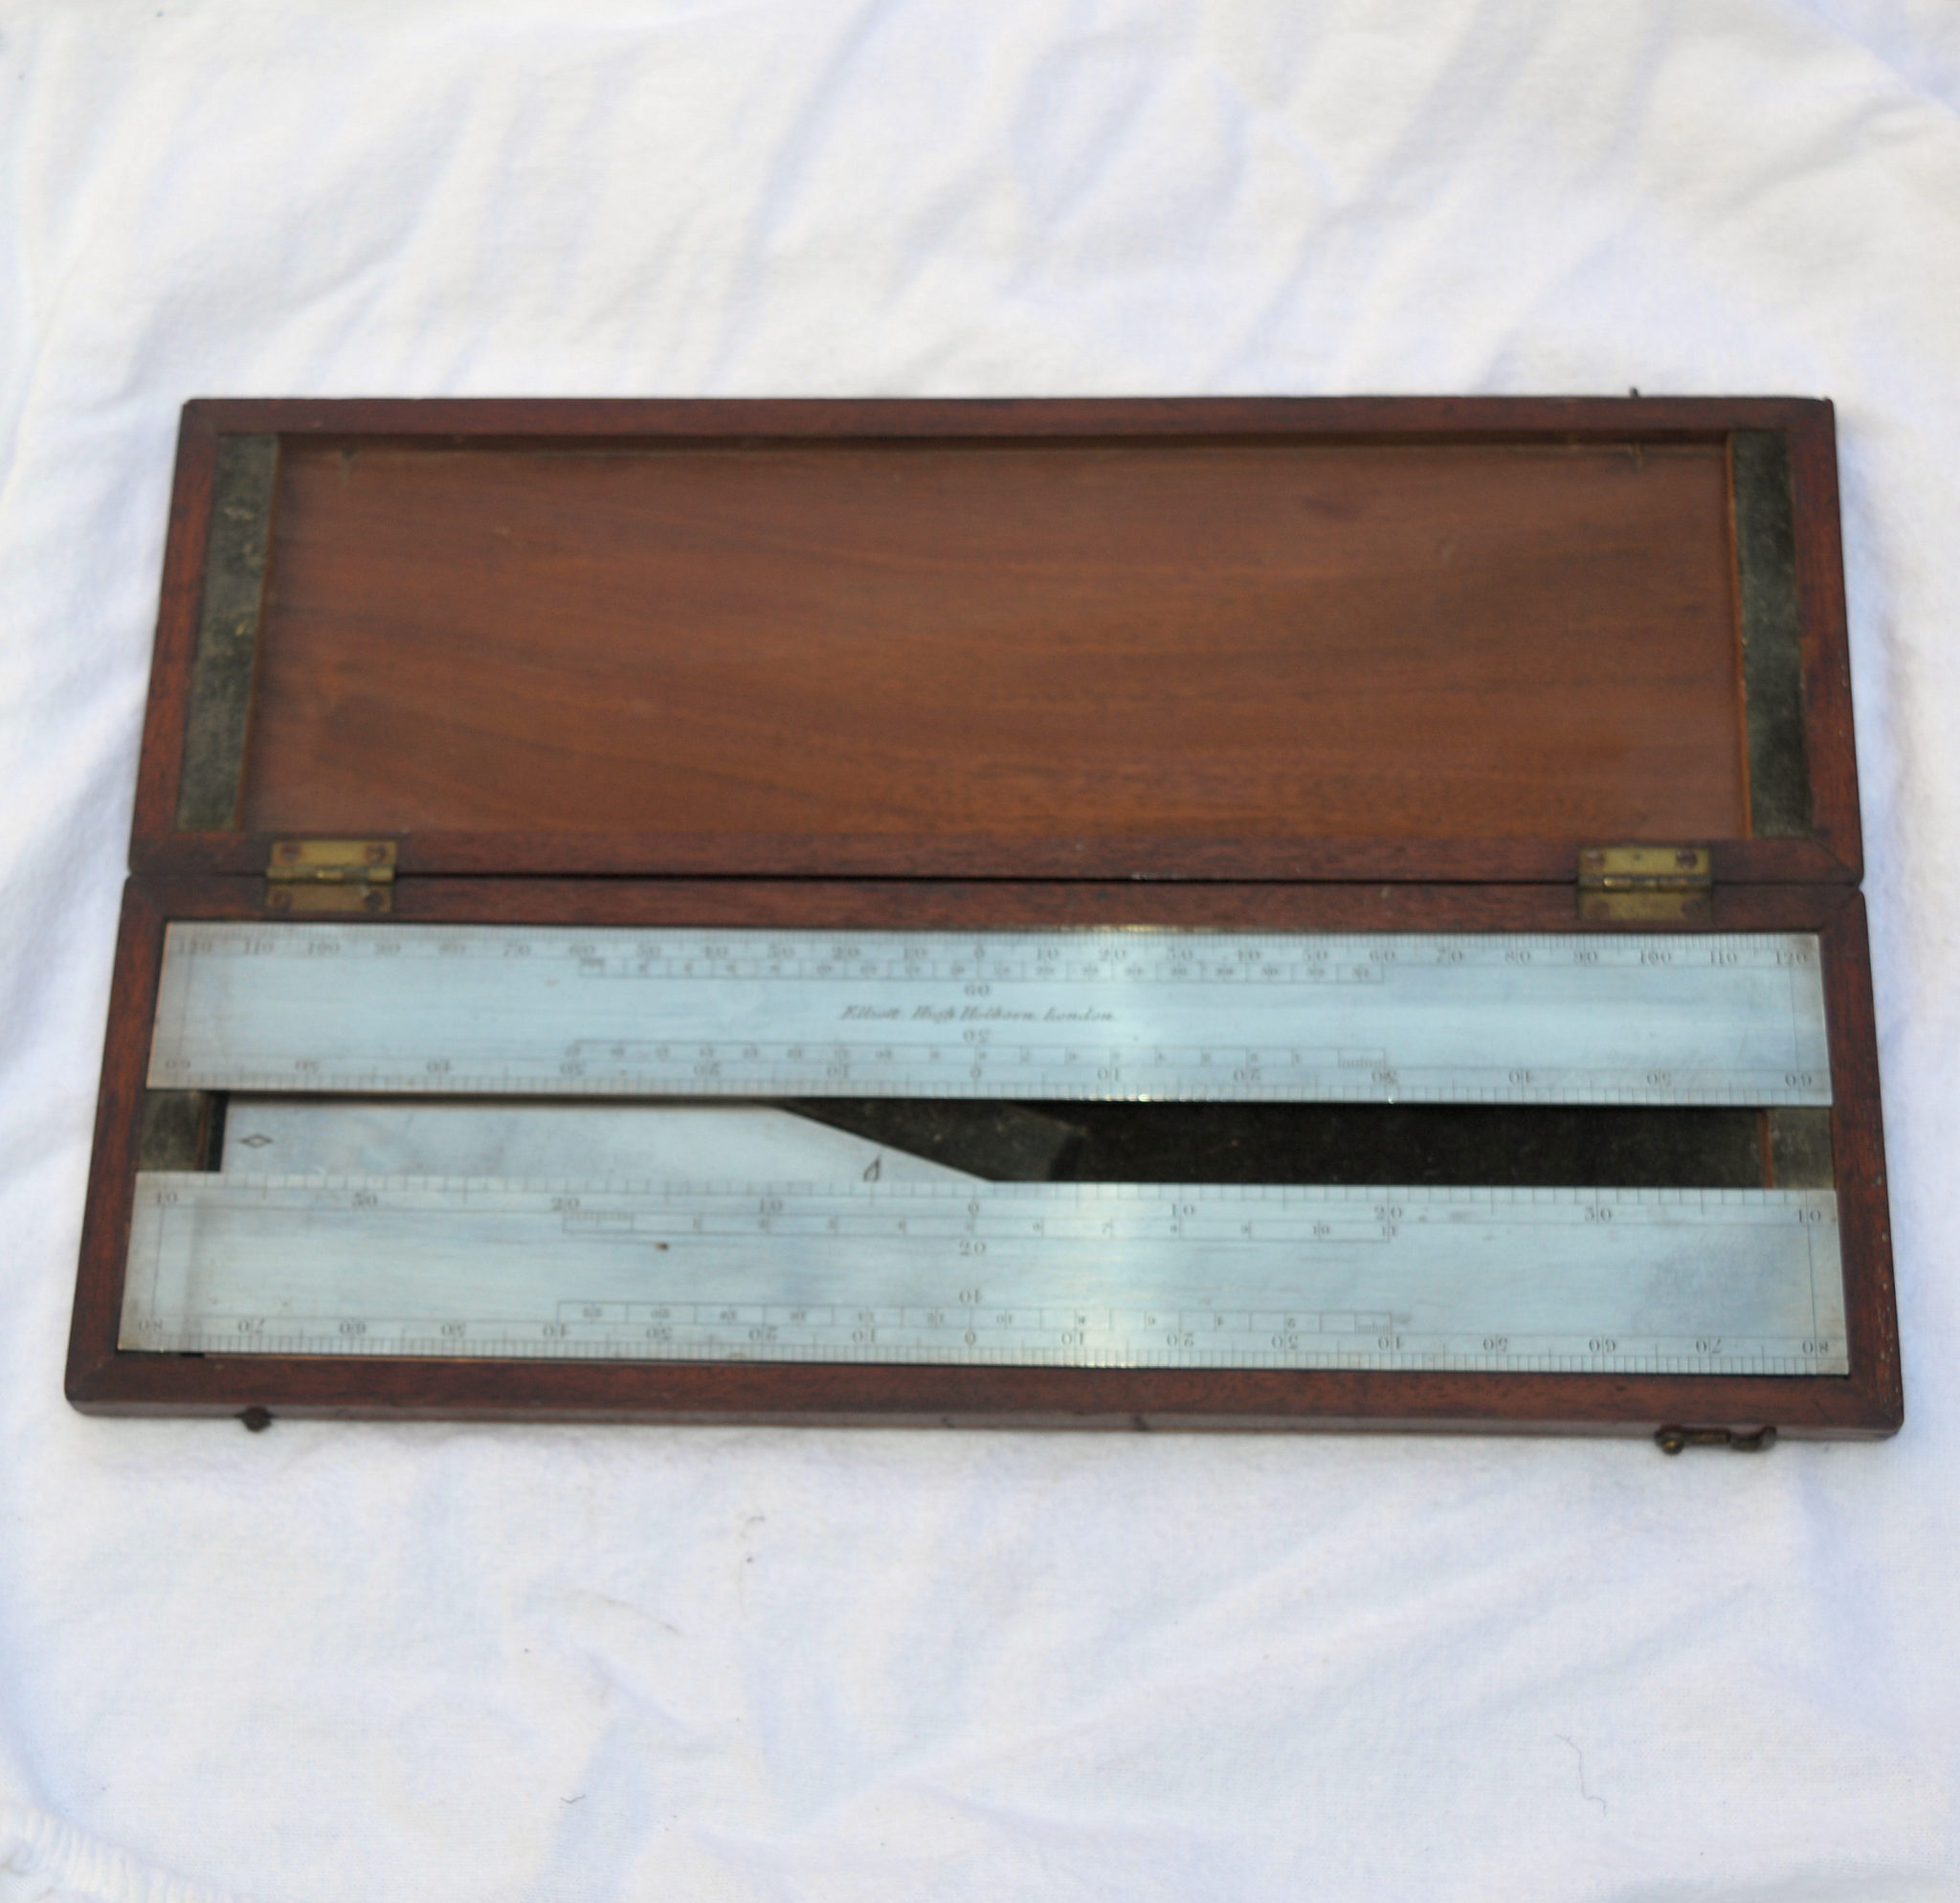 SOLD – Cased set of Marquois Scales – Elliott, High Holborn.